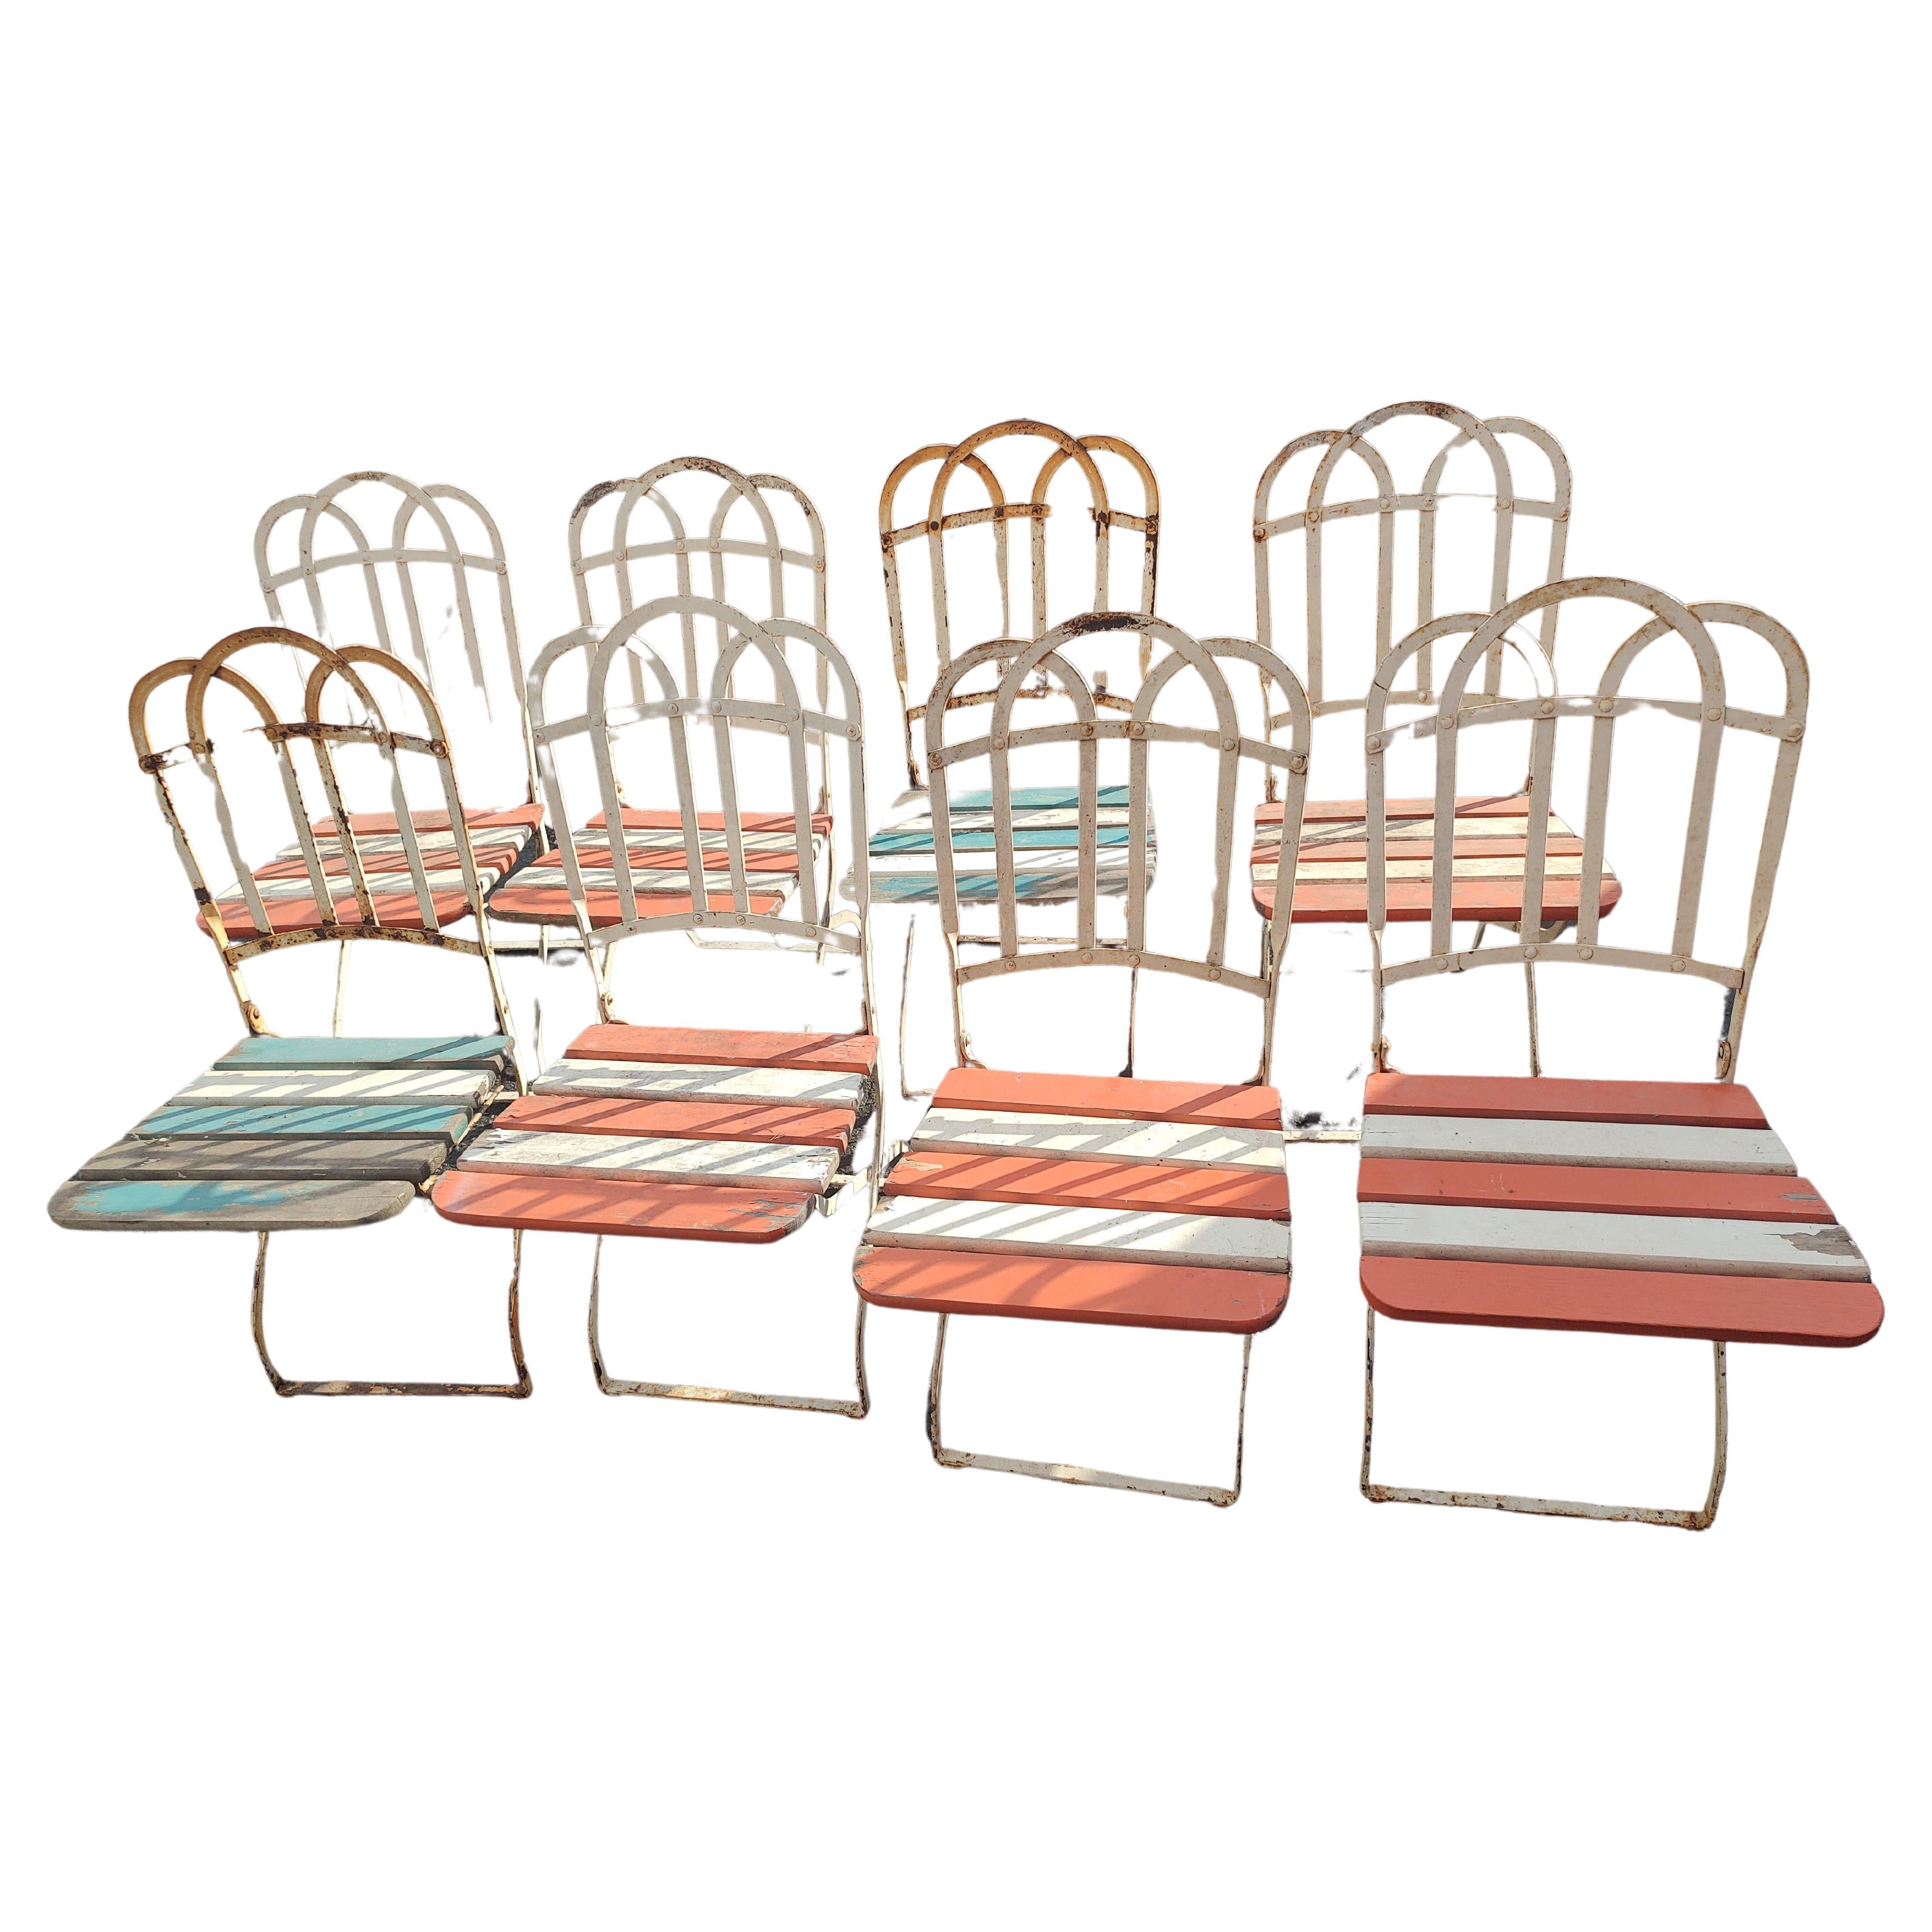 Set of 8 French Fold-up Iron with Slatted Wood Cafe Garden Dining Chairs C1920